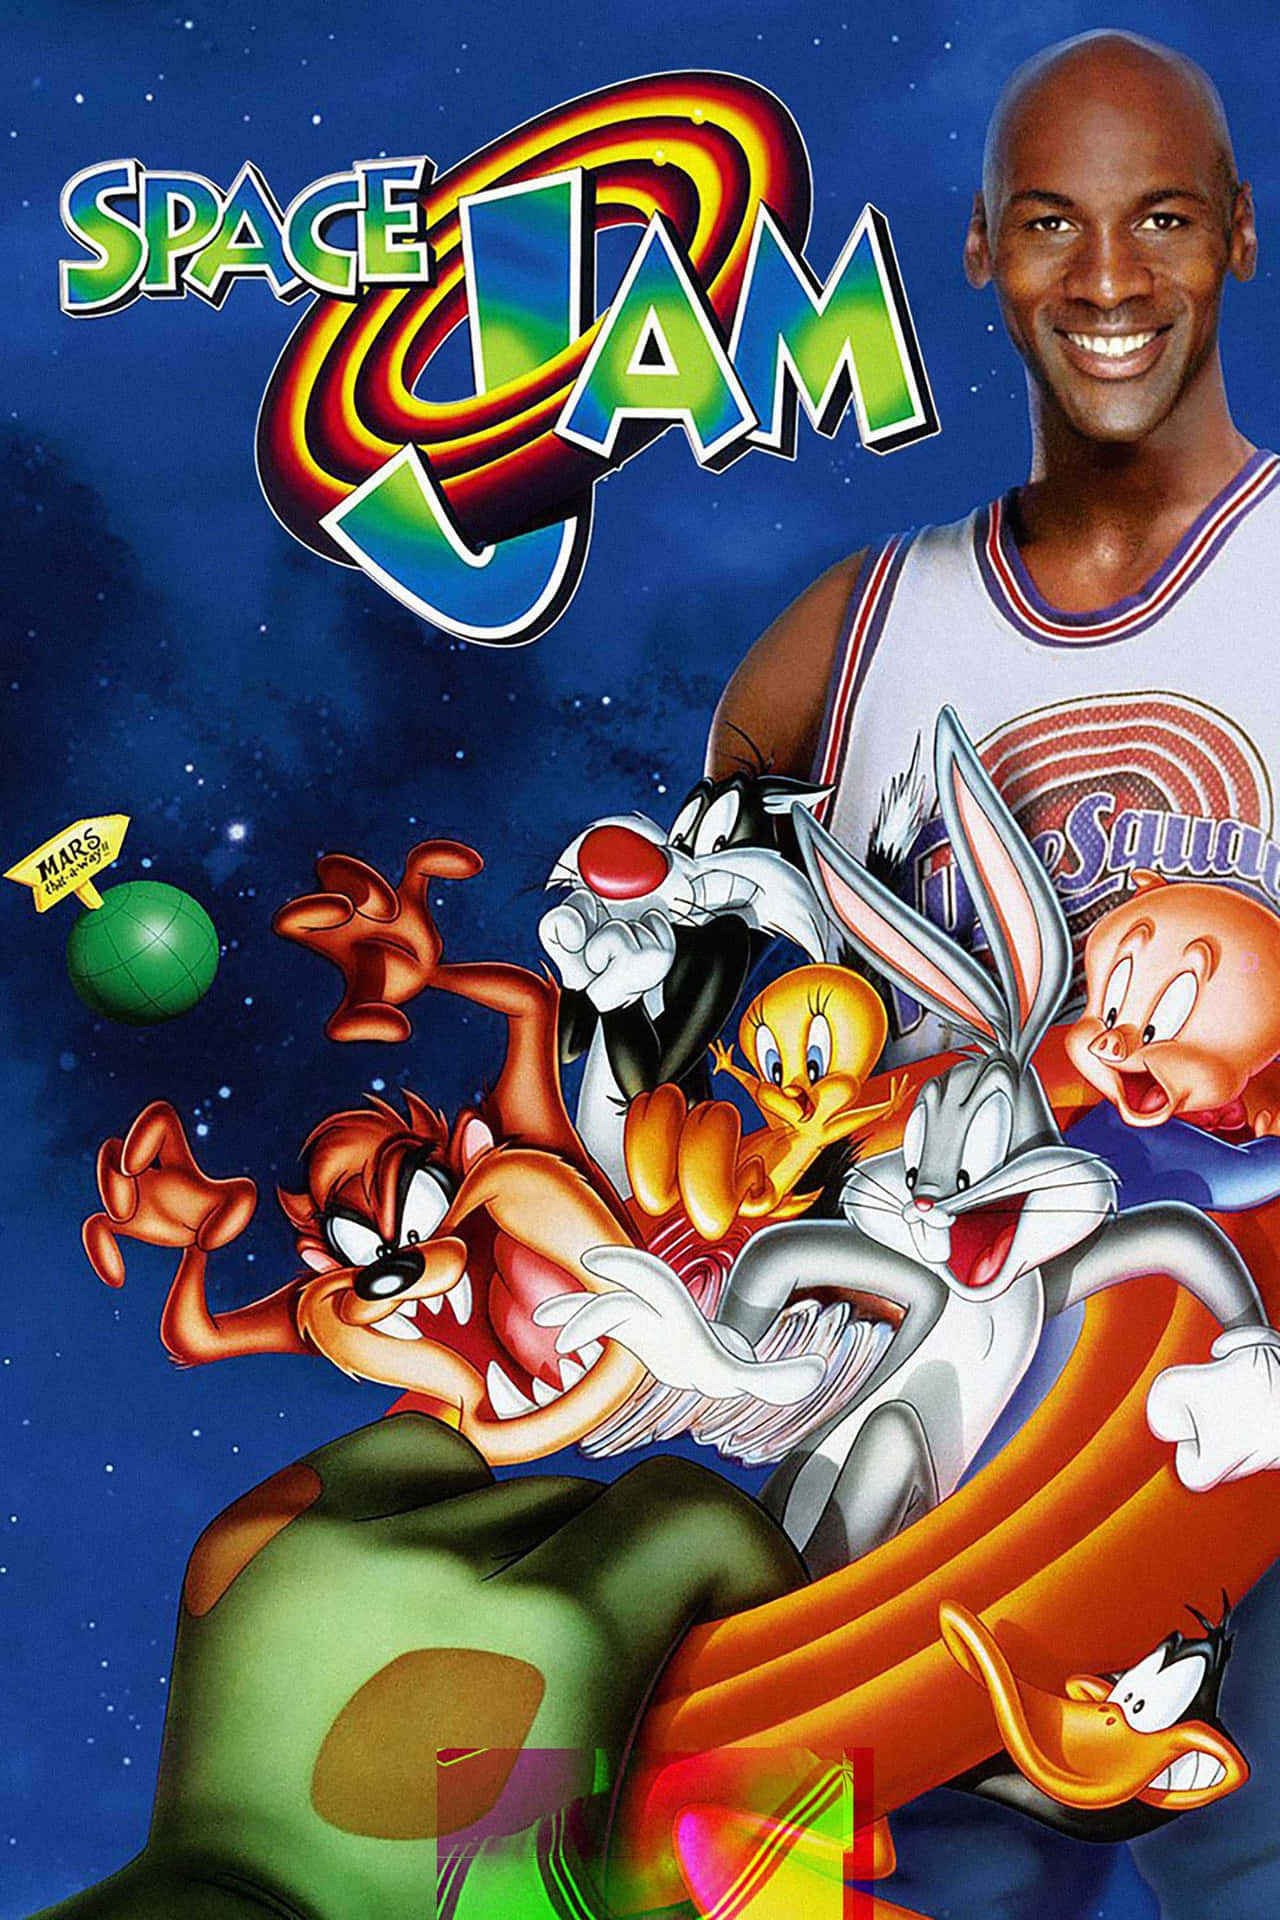 Space Jam - A Cartoon With A Man And Cartoon Characters Wallpaper